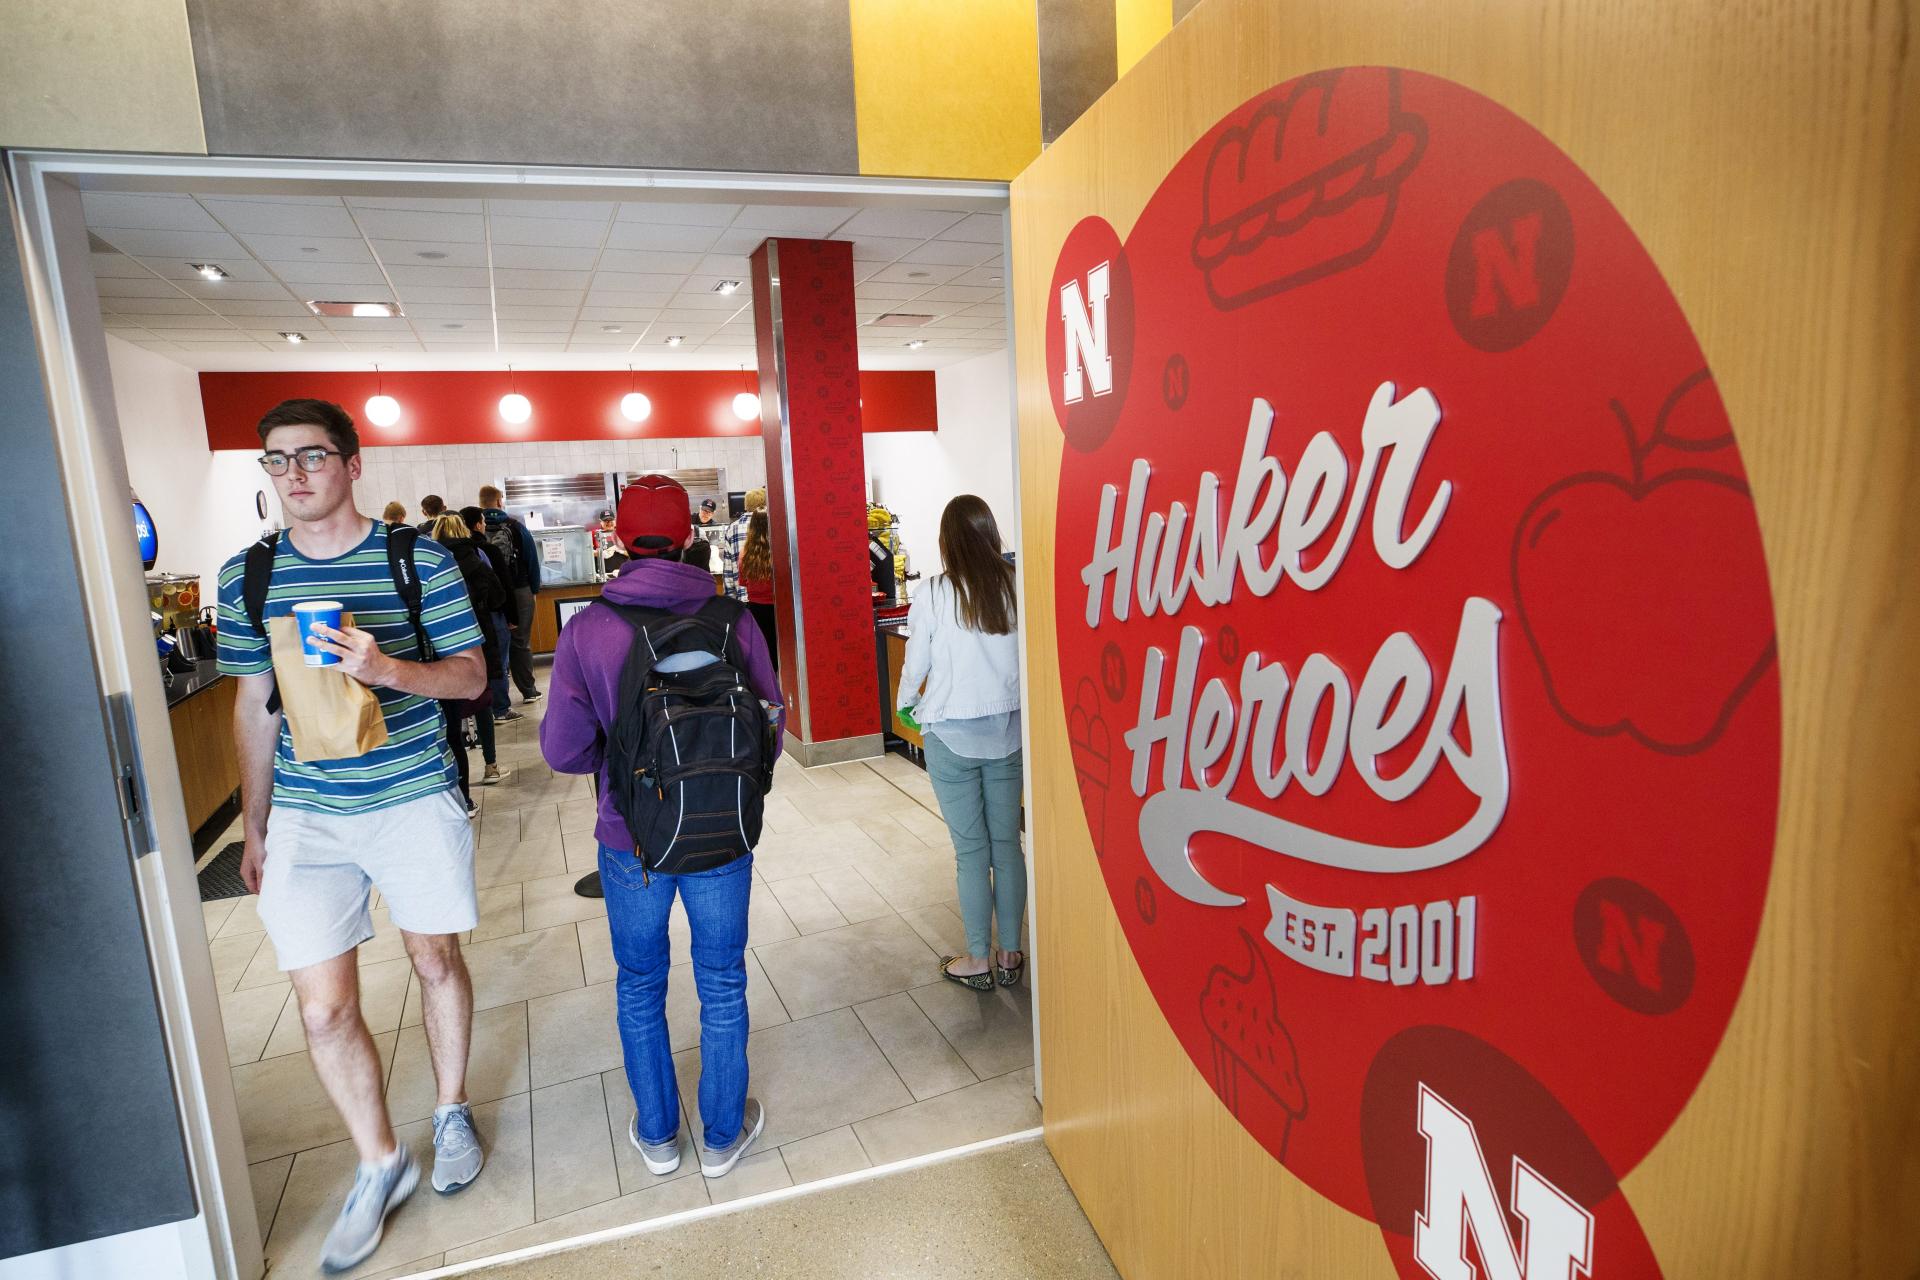 Students exit Husker Heroes at Cather